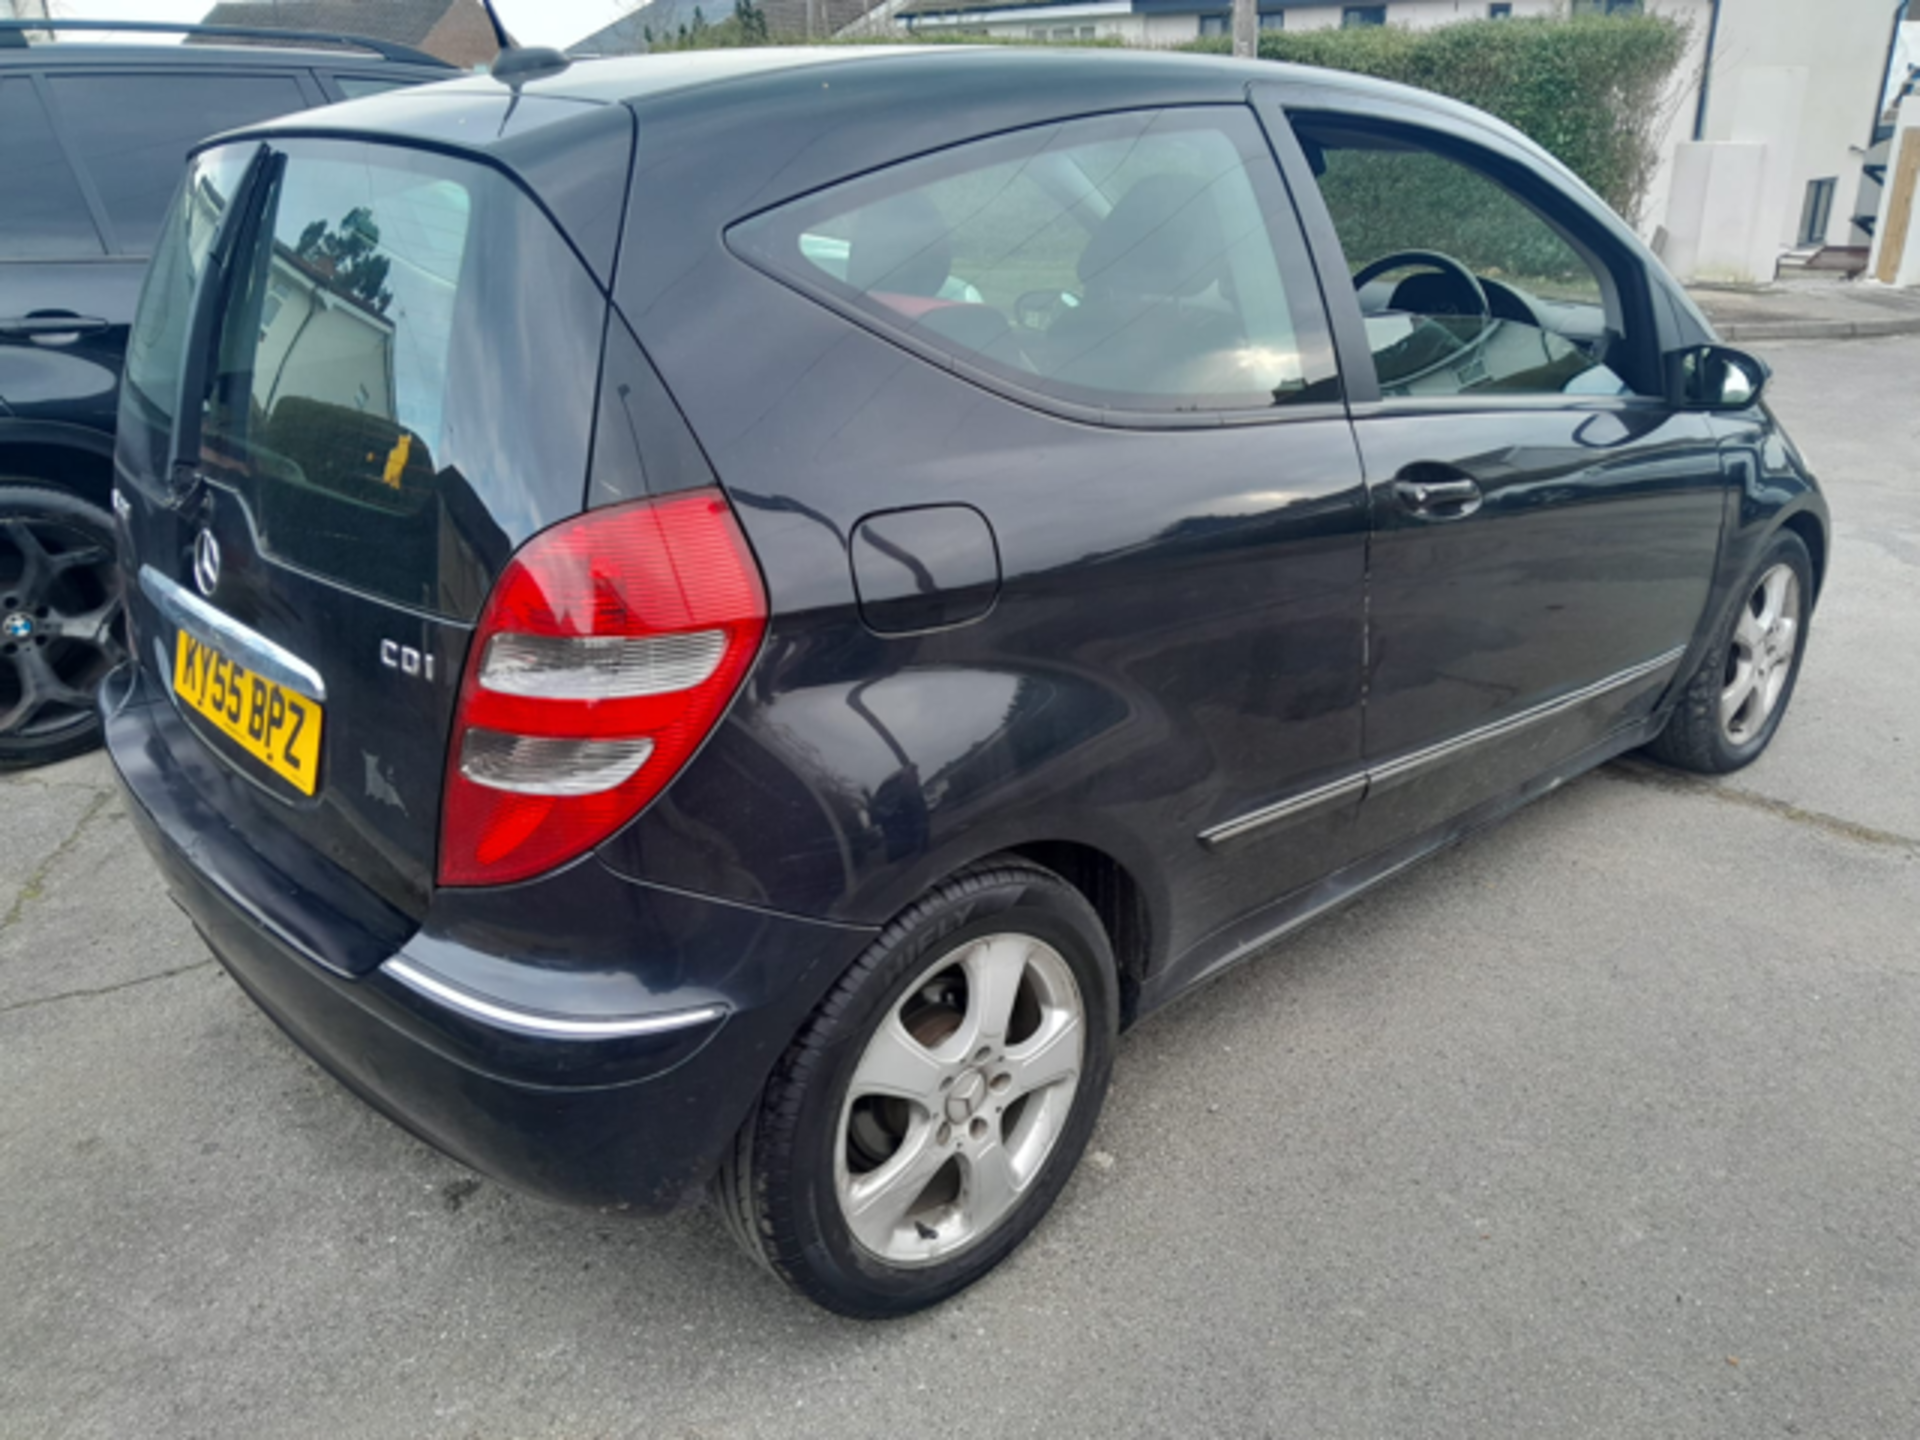 Mercedes A180 CDI, KY55 BPZ - Image 3 of 8